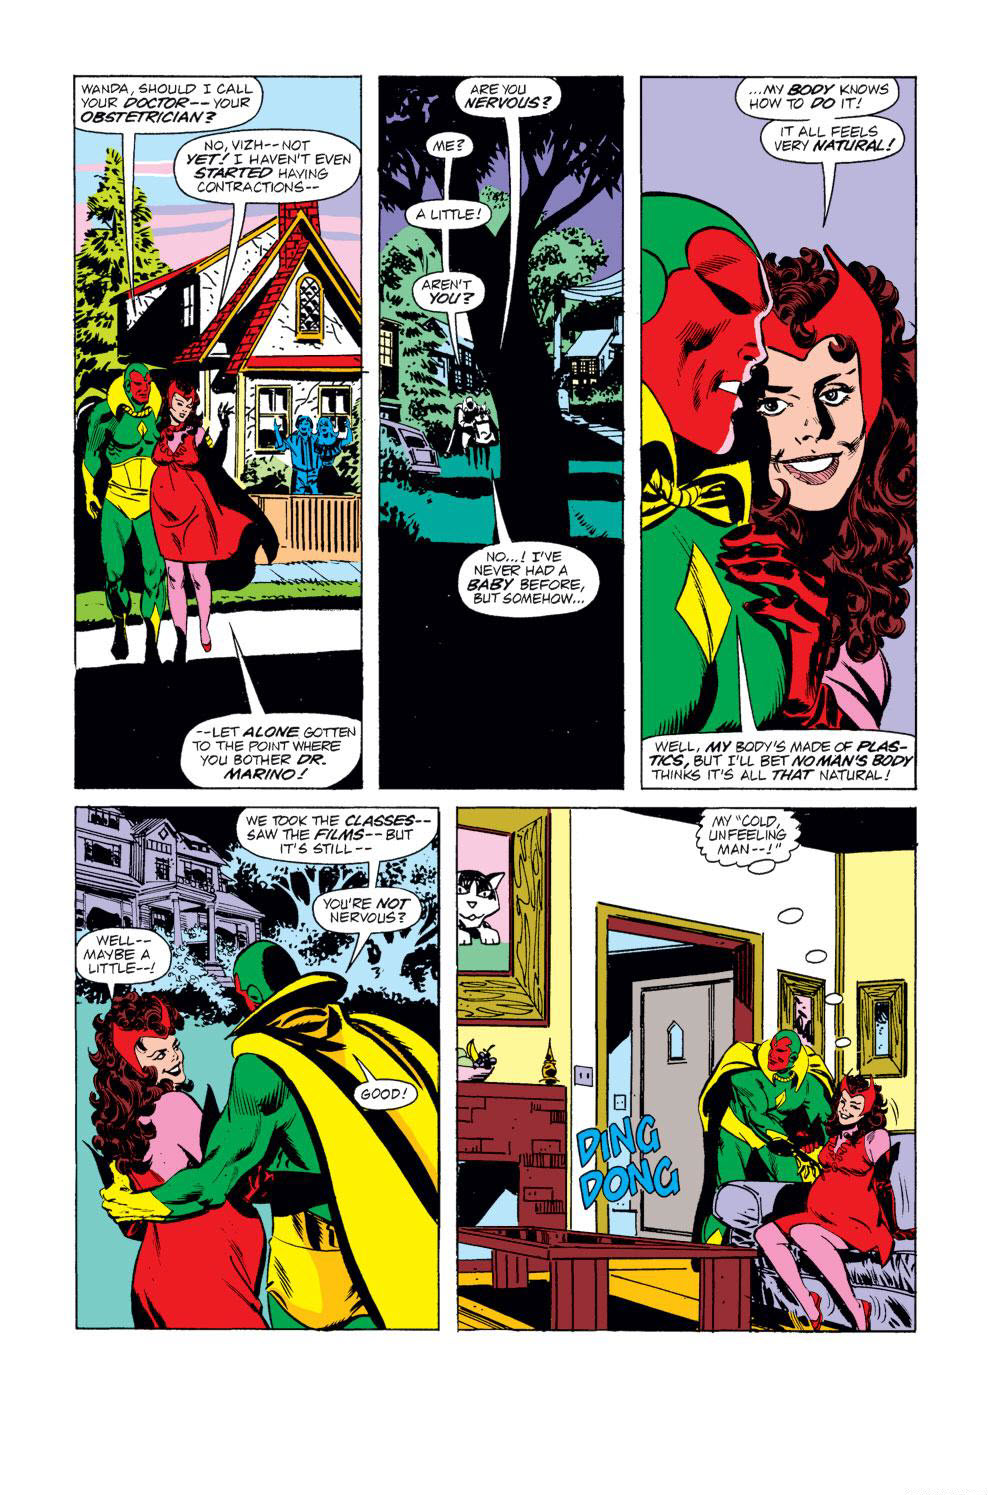 Vision and the Scarlet Witch (1985) #2, Comic Issues